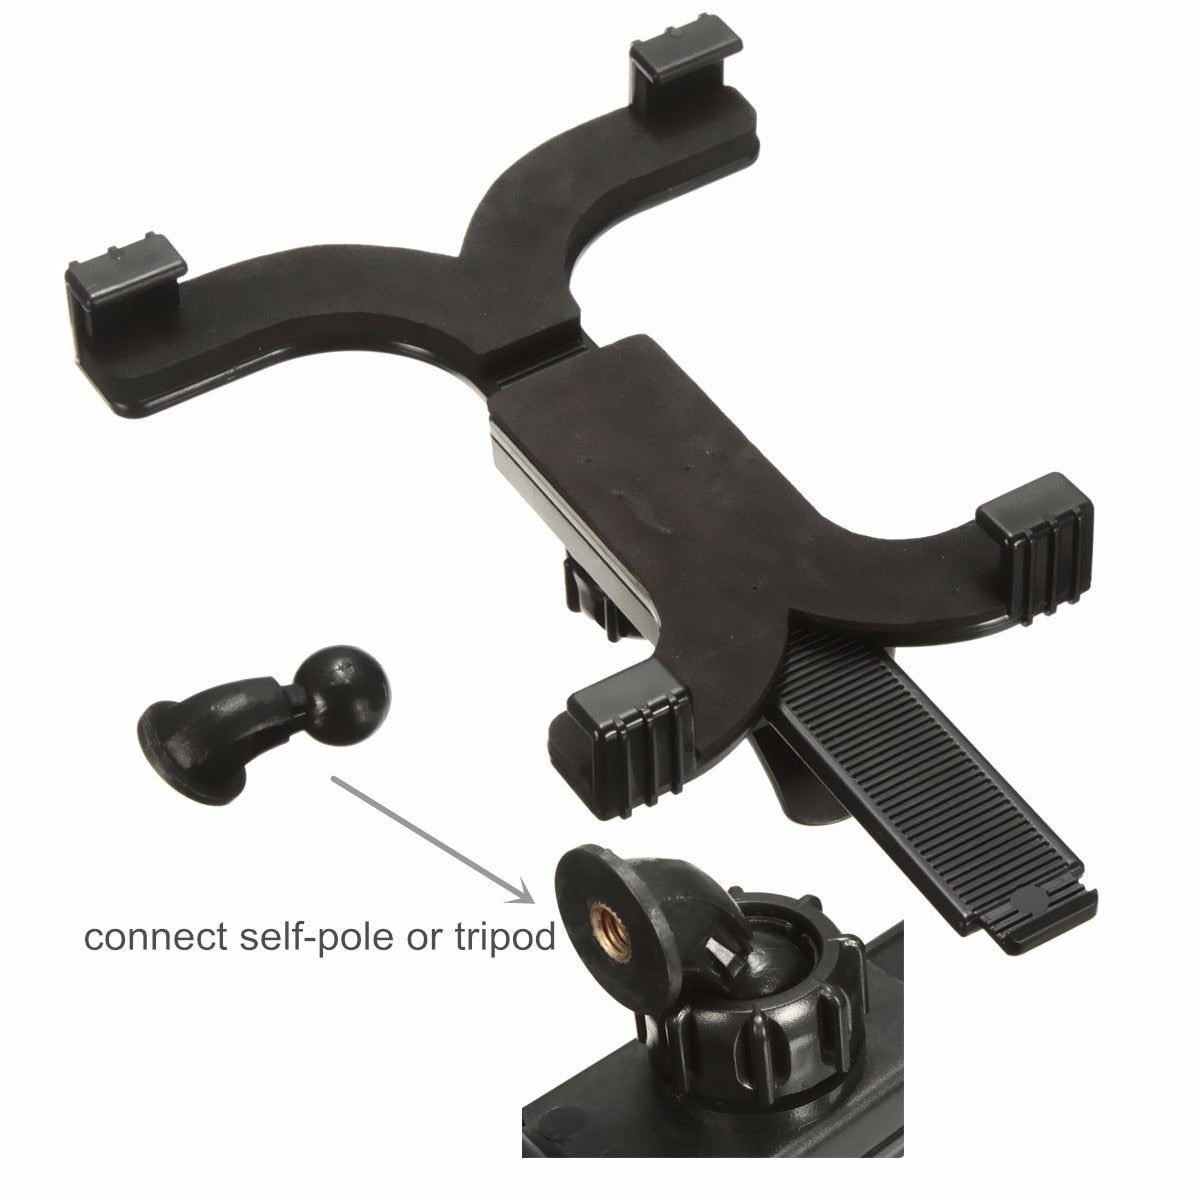 ABS Selfie Tripod Stand for 7